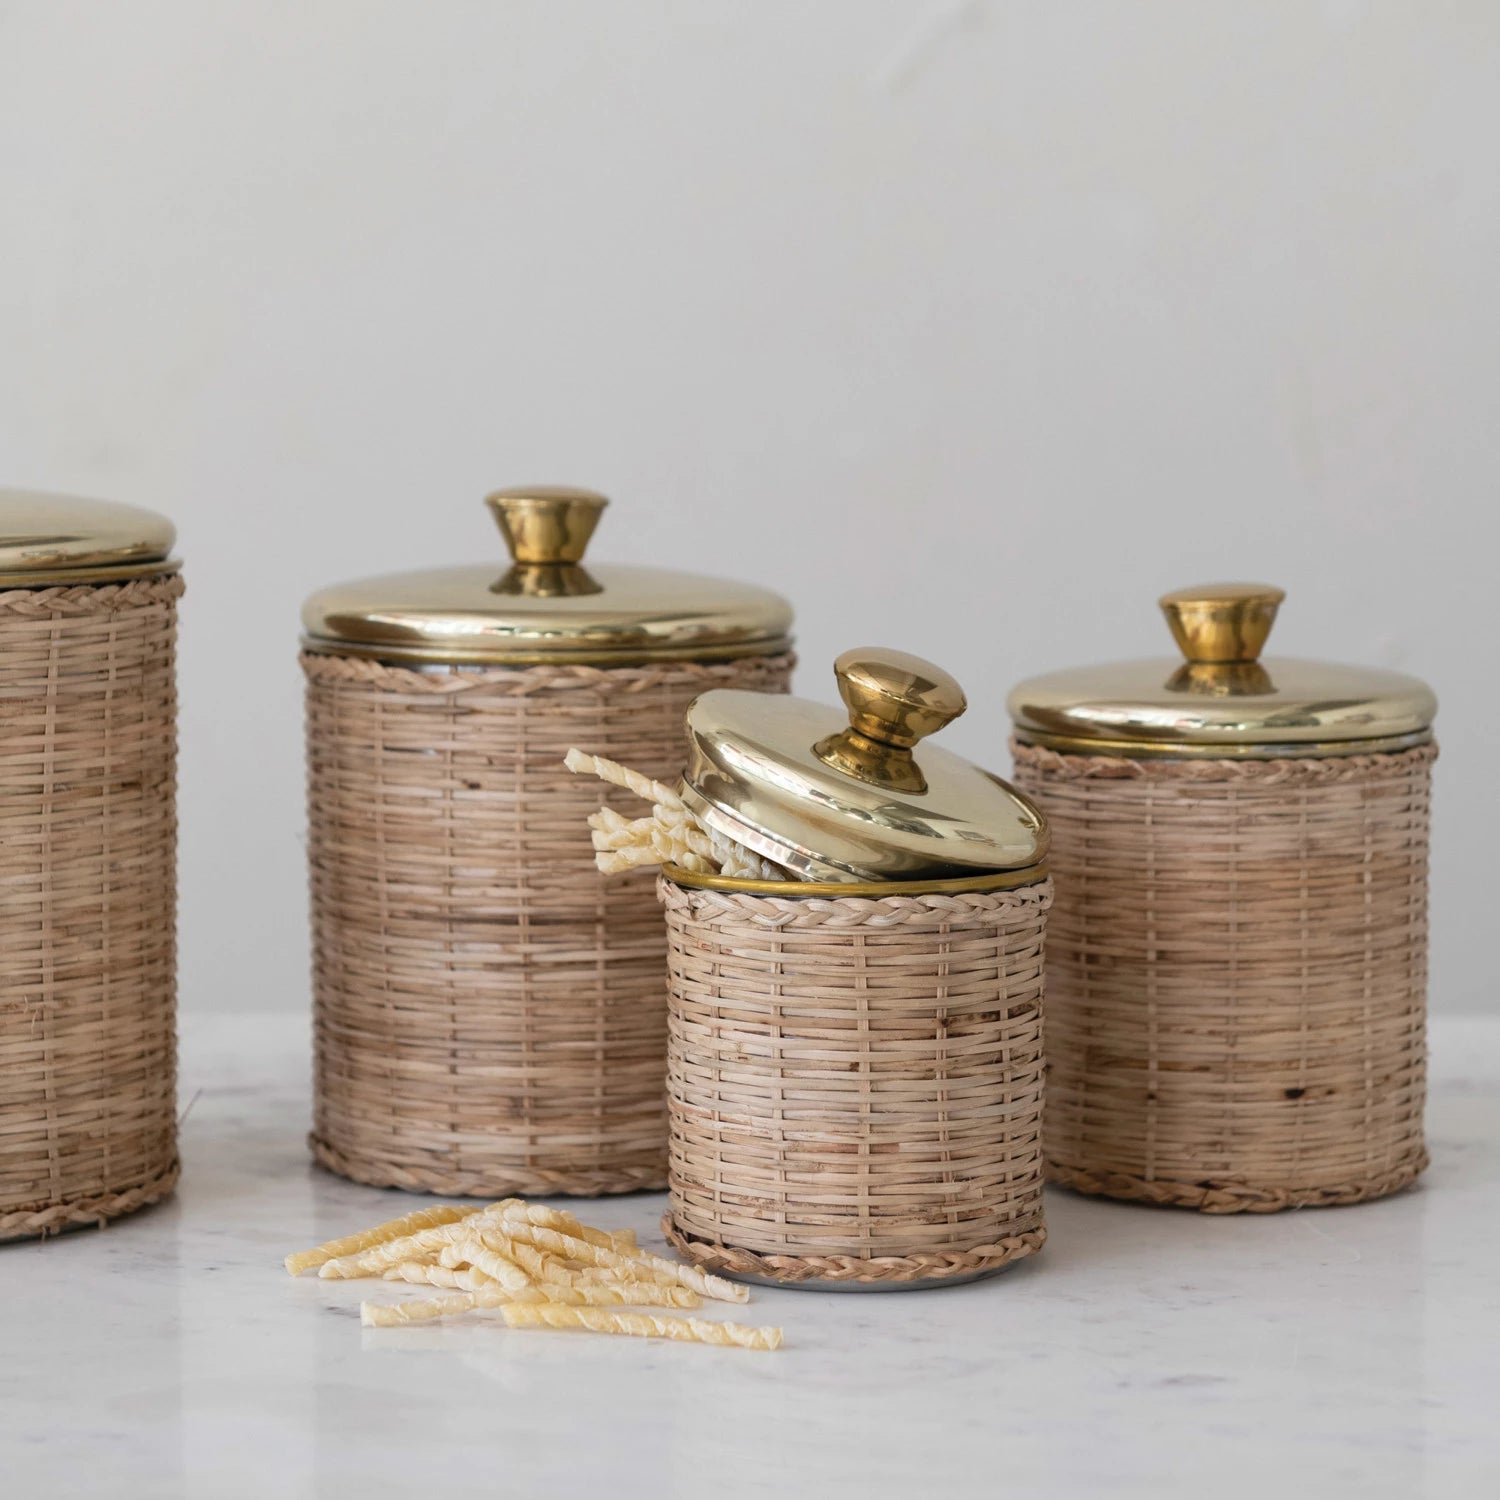 Rattan Wrapped Brass Stainless Steel Canister